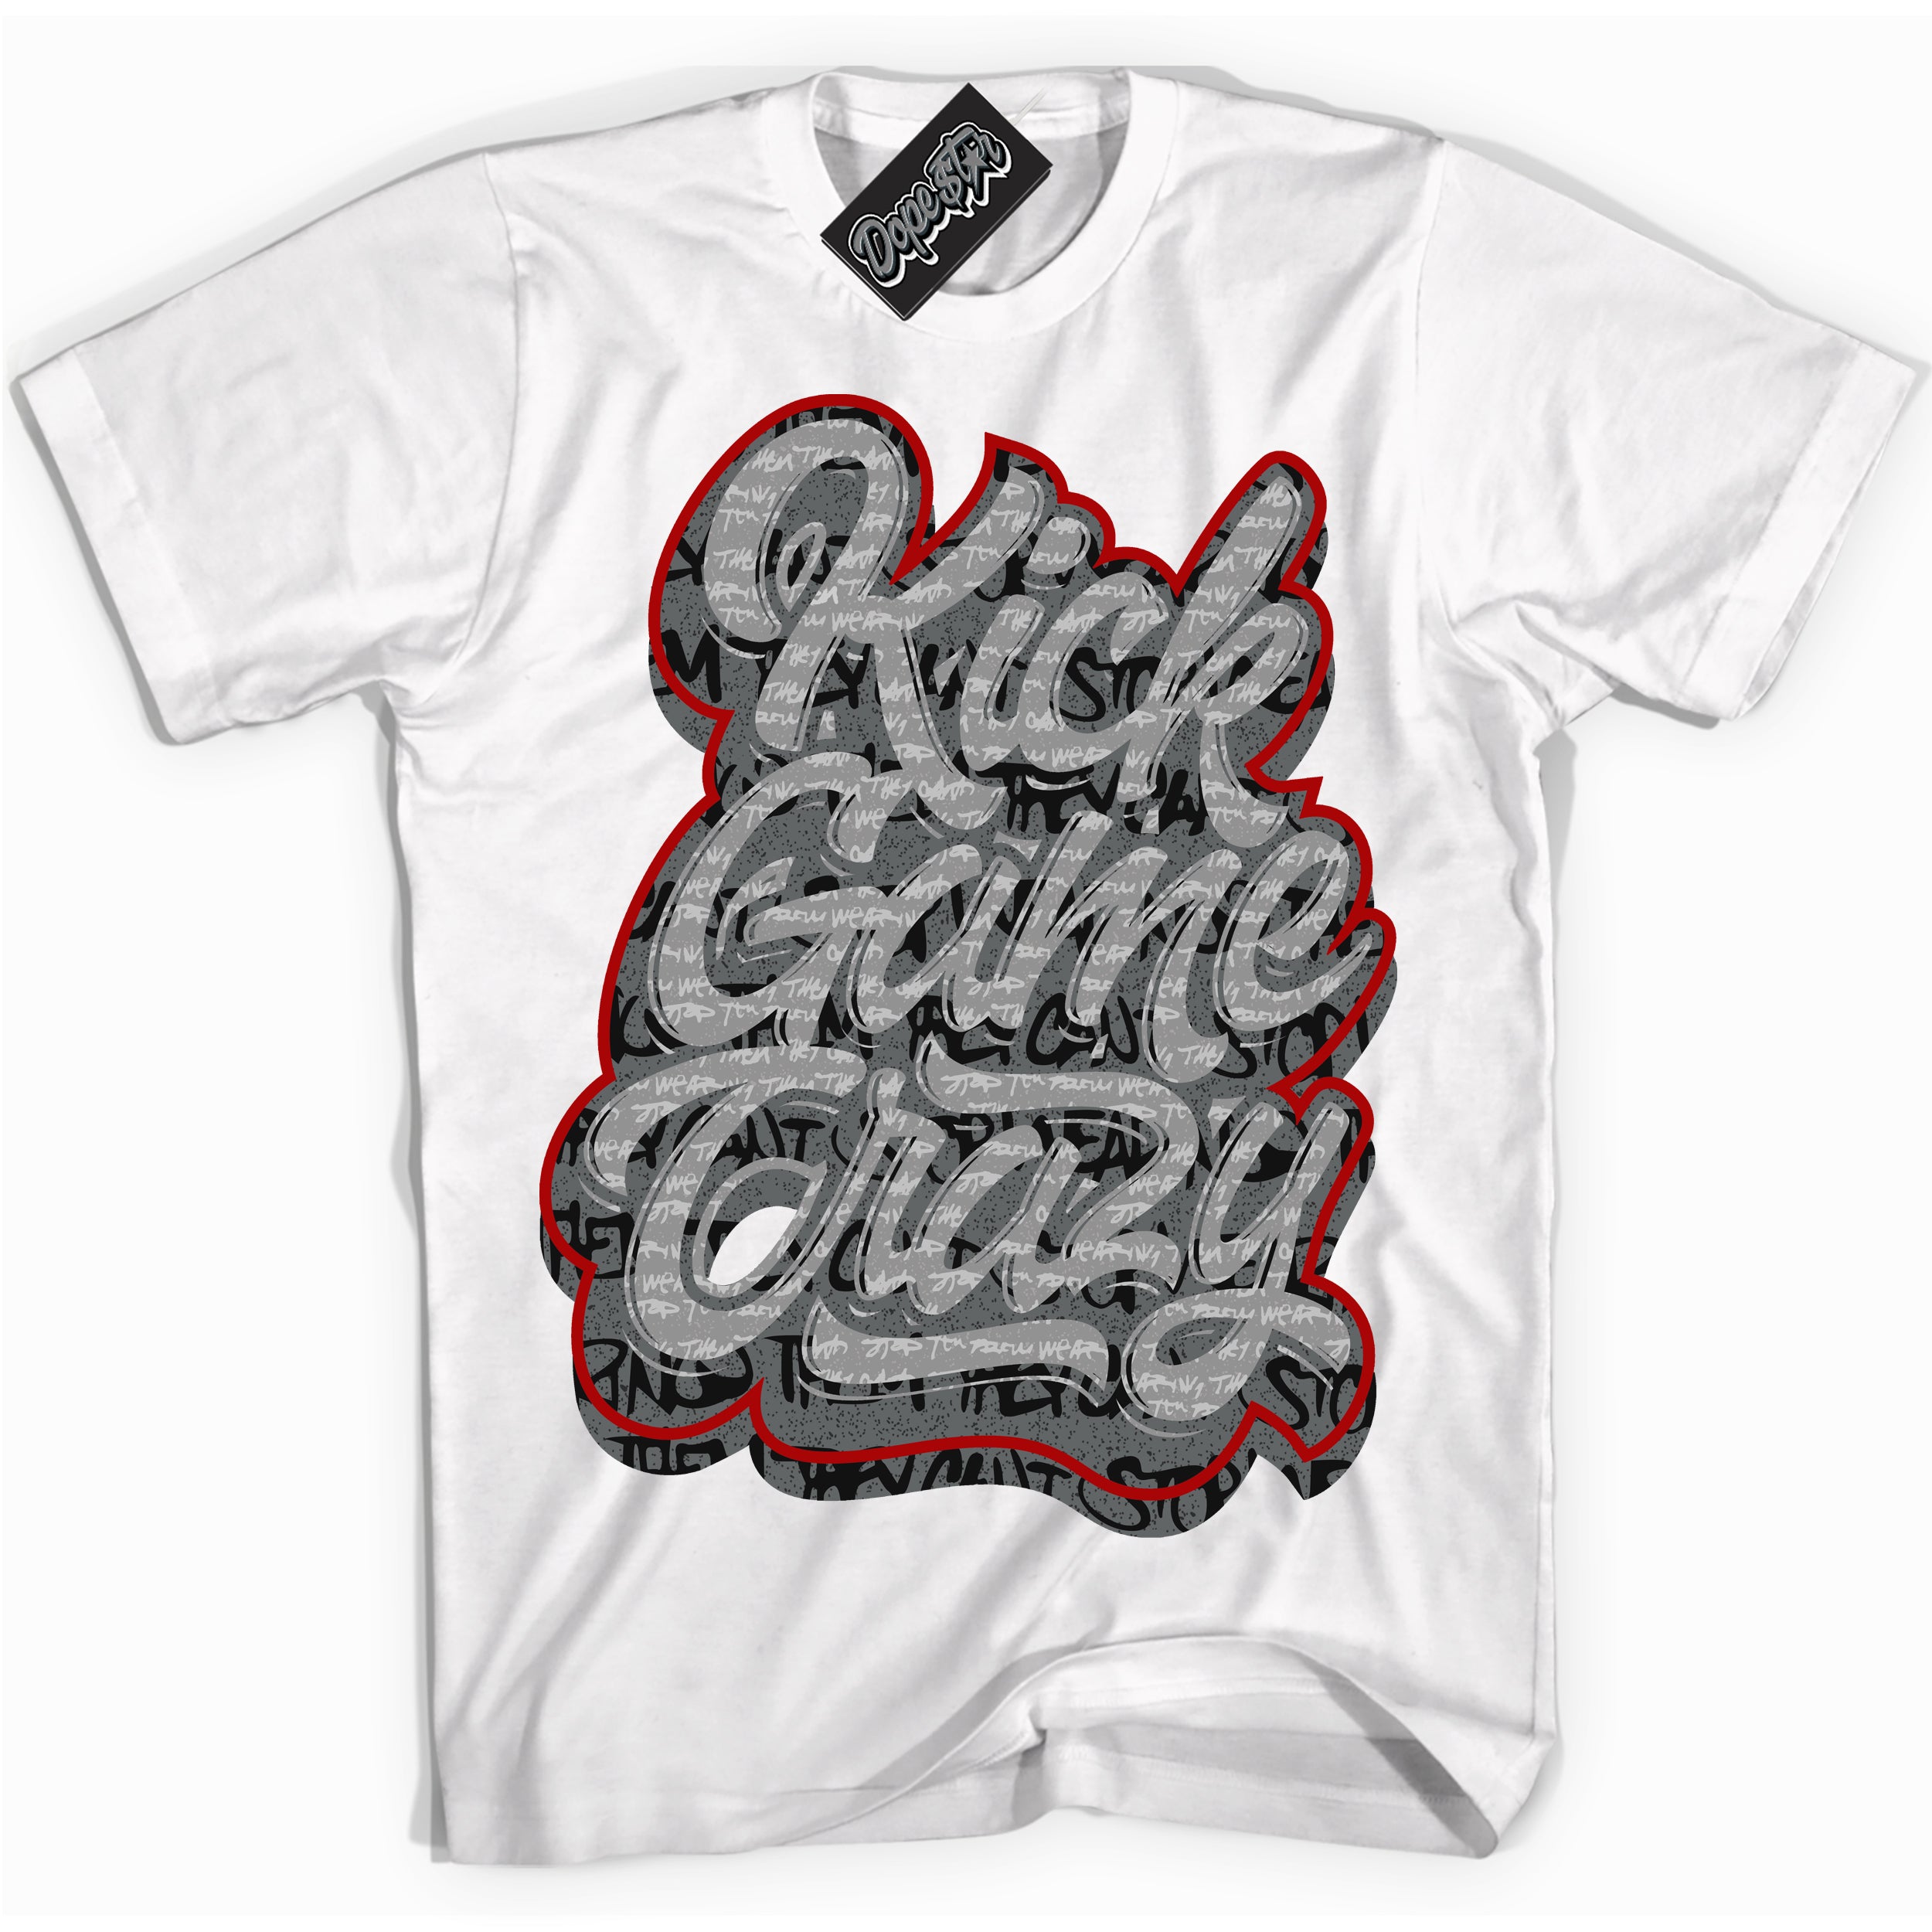 Cool White Shirt with “ Kick Game Crazy ” design that perfectly matches Rebellionaire 1s Sneakers.